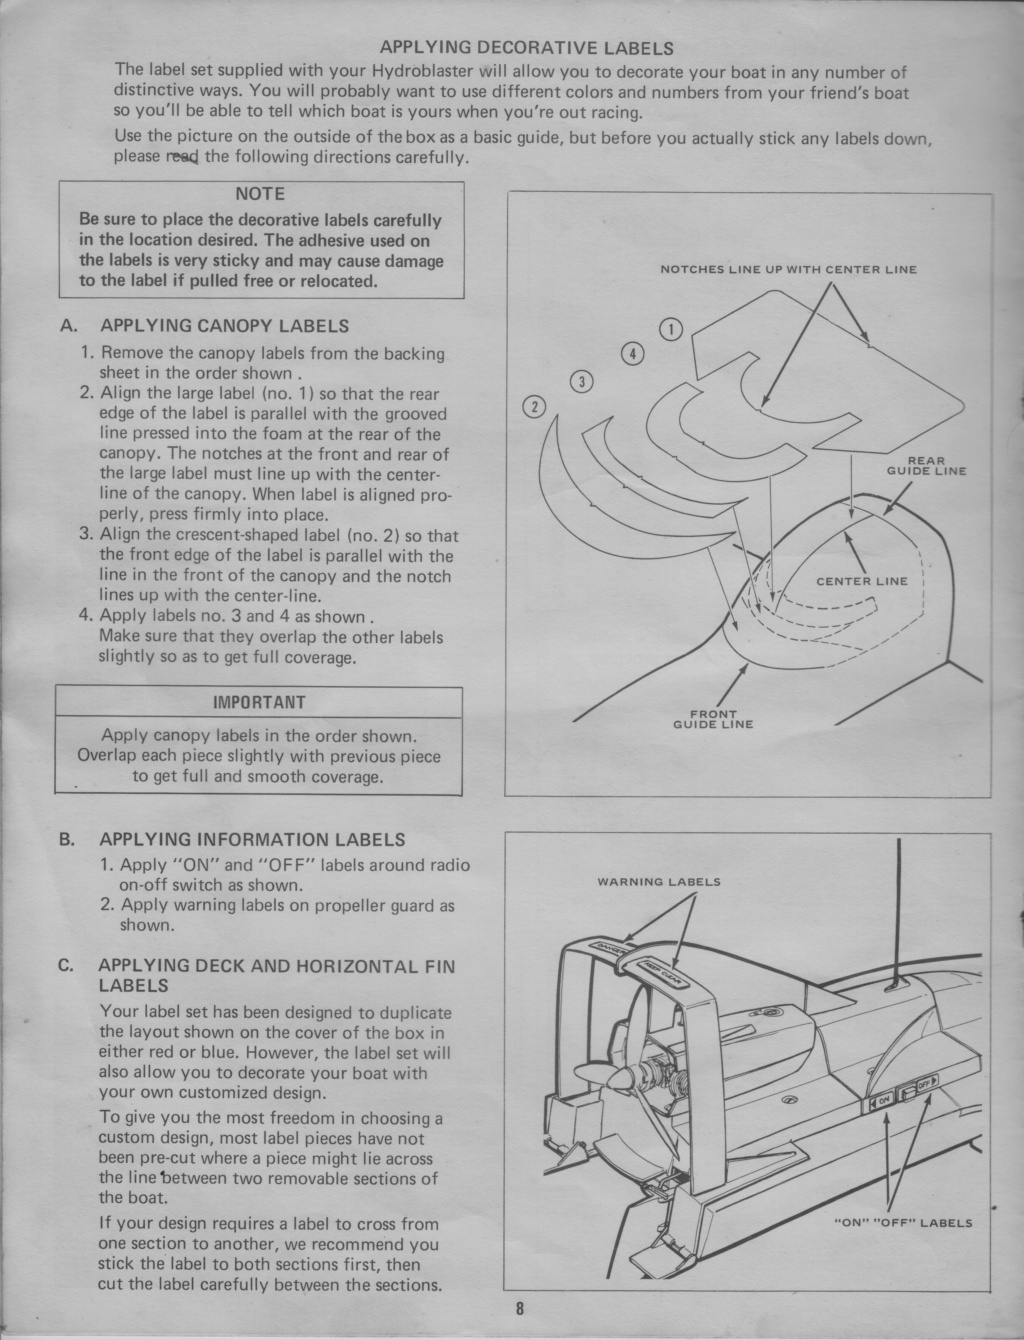 Hydro Blaster pictures and manual scans . Hydro_17